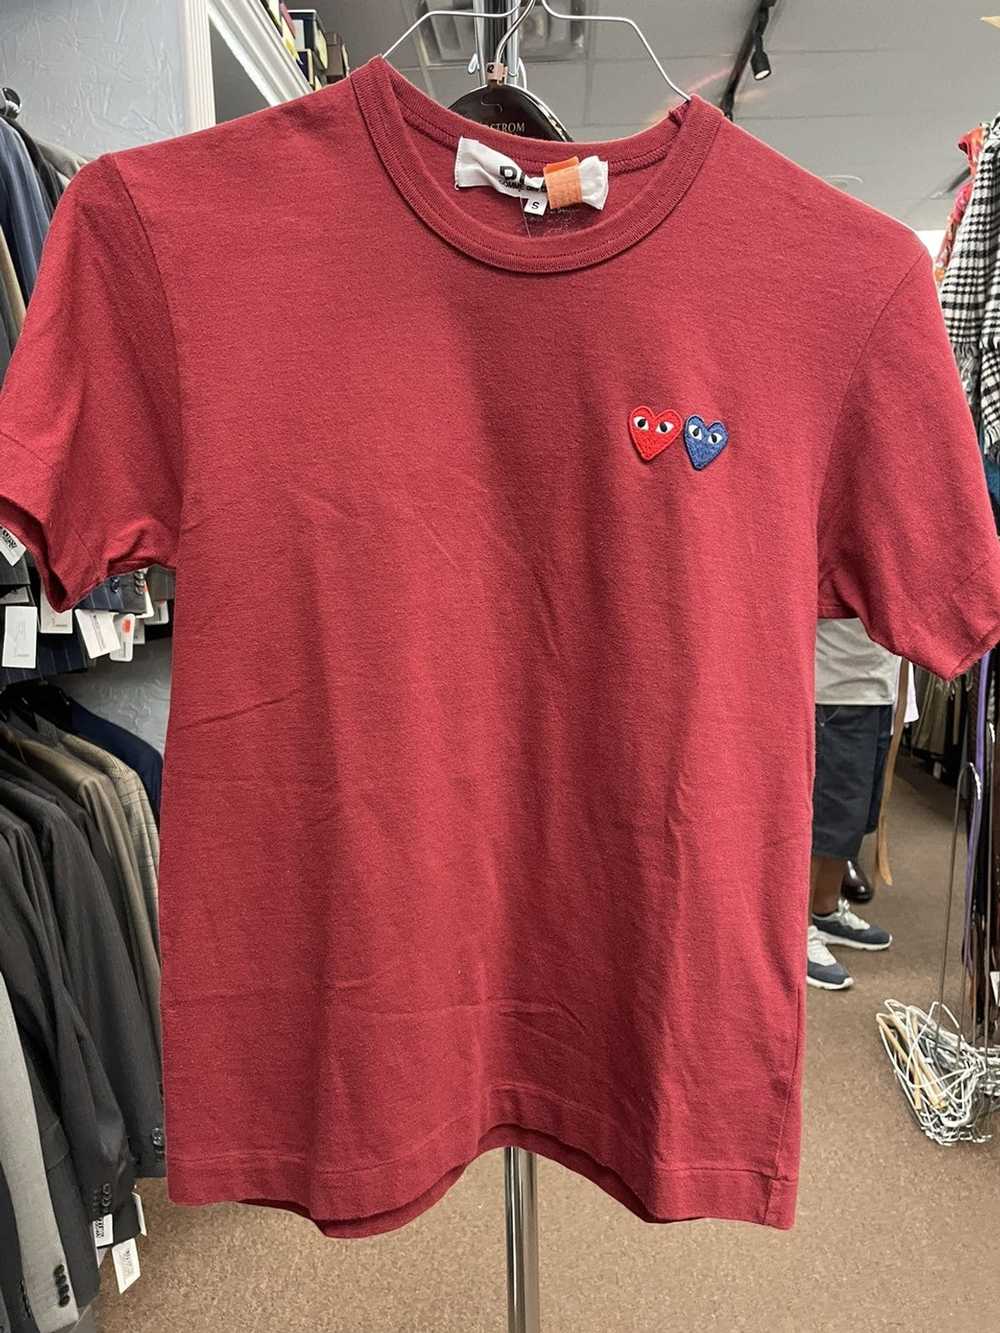 Comme des Garcons Red Cdg heart tee - image 1